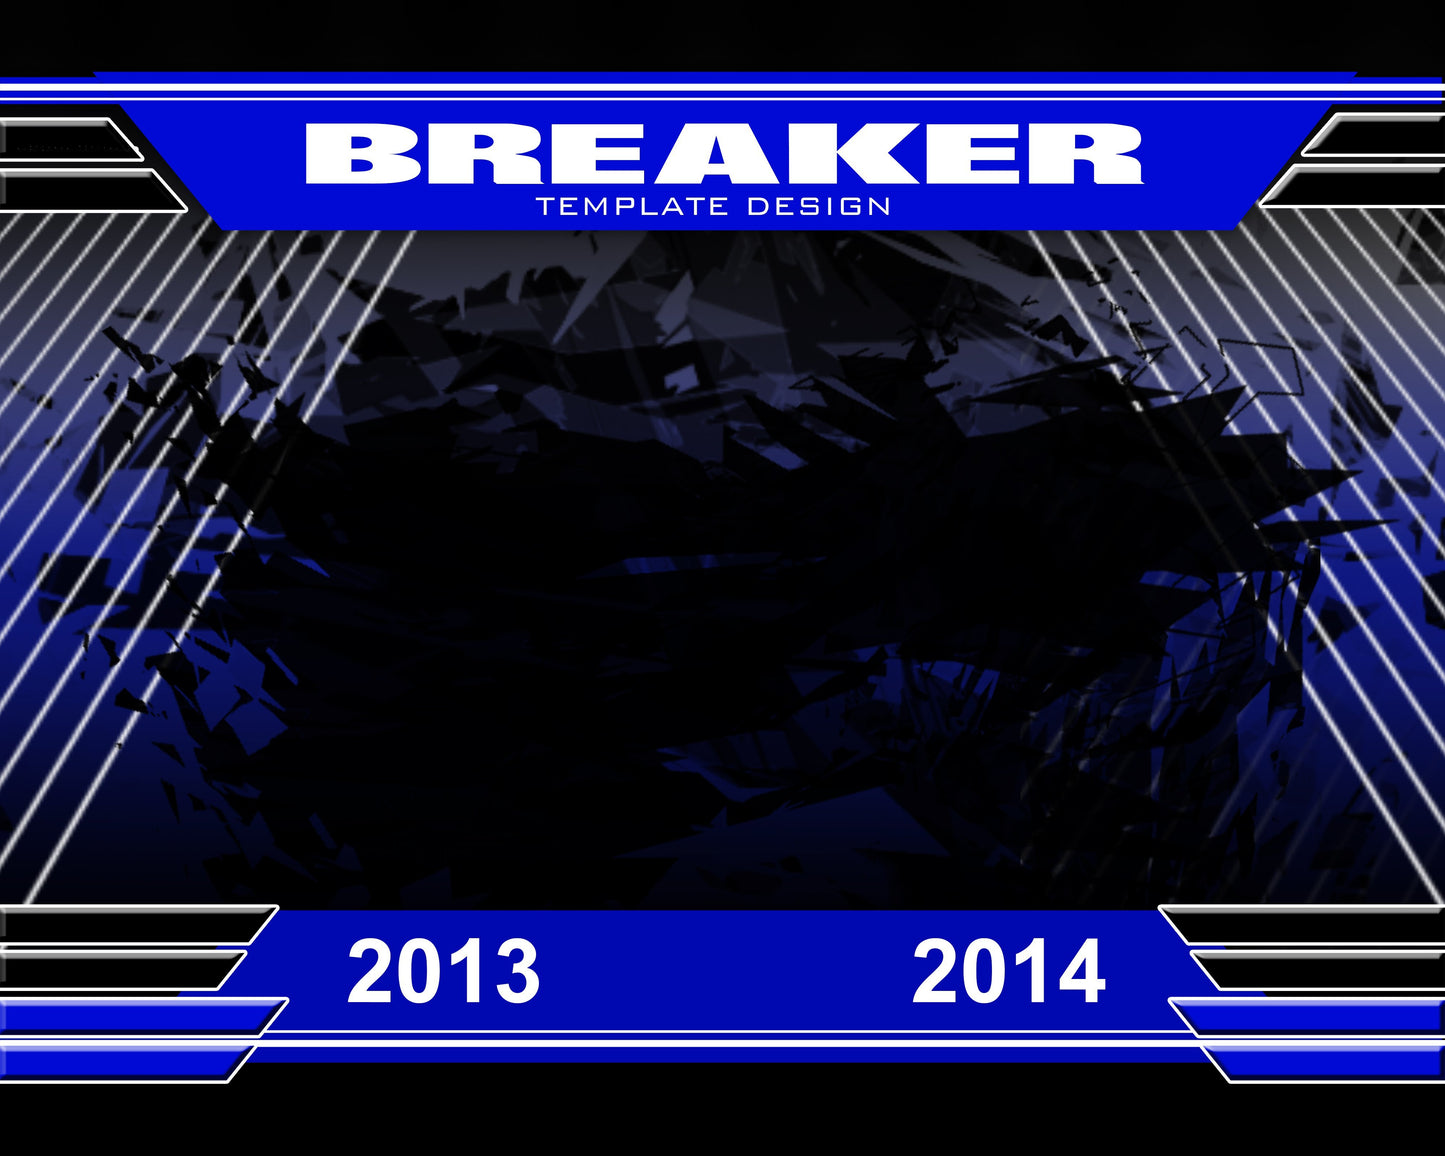 Breaker v.1 - Xtreme Team-Photoshop Template - Photo Solutions